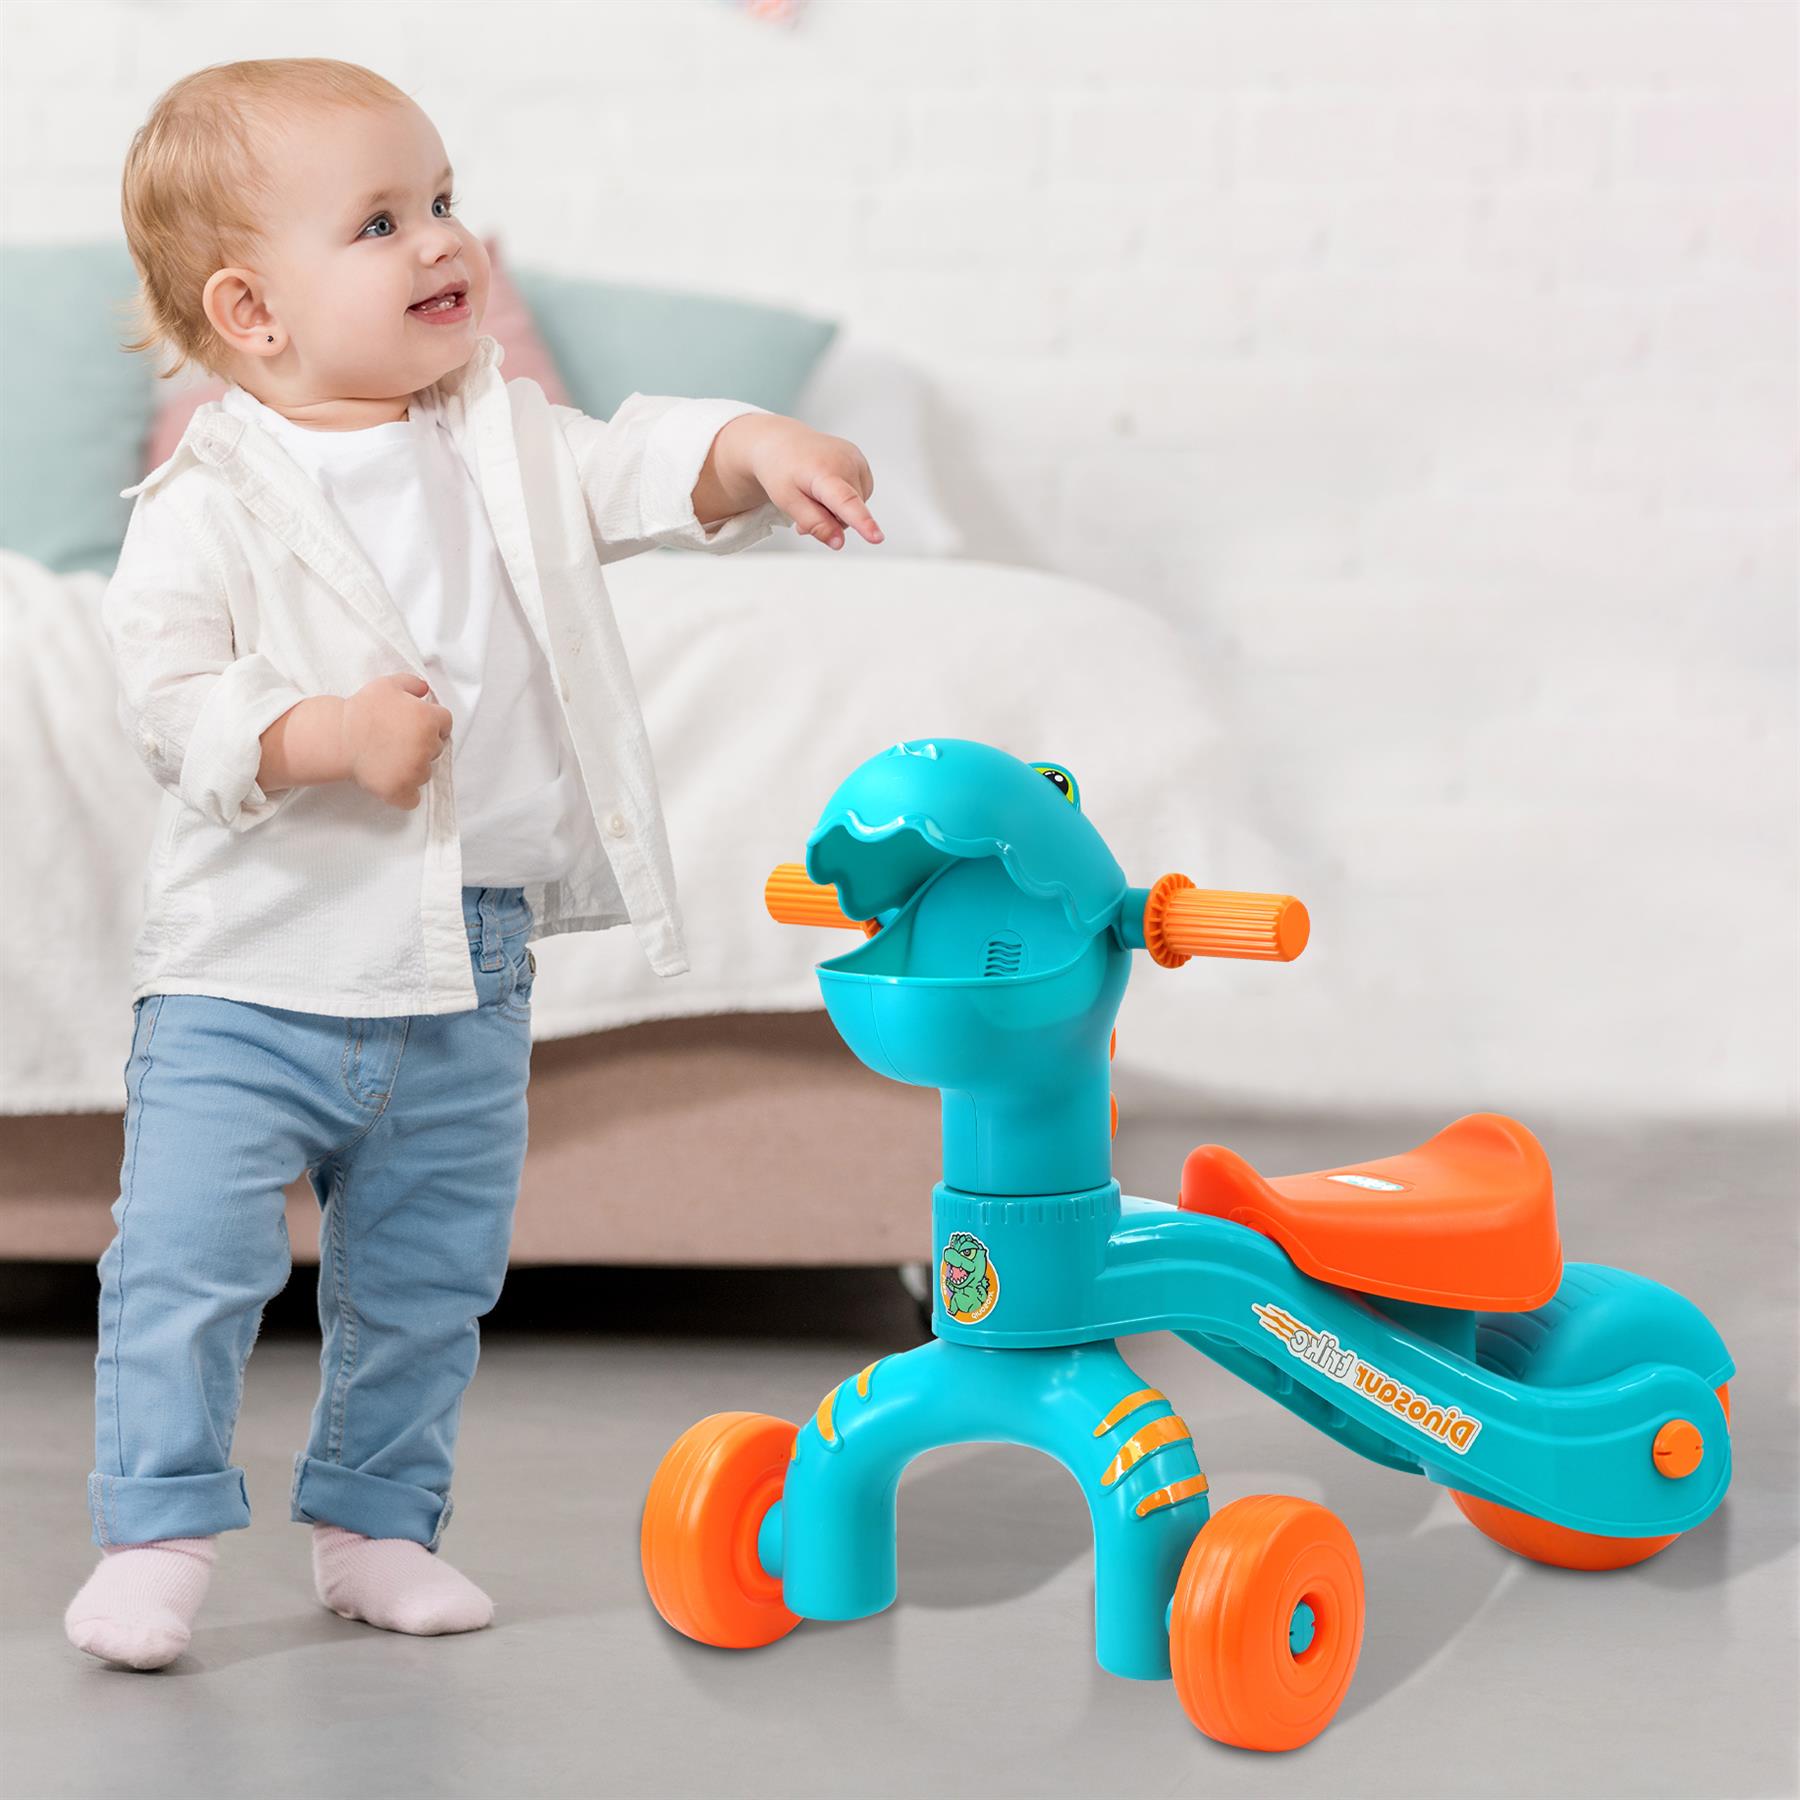 Dino Trike Interactive Ride On by The Magic Toy Shop - The Magic Toy Shop